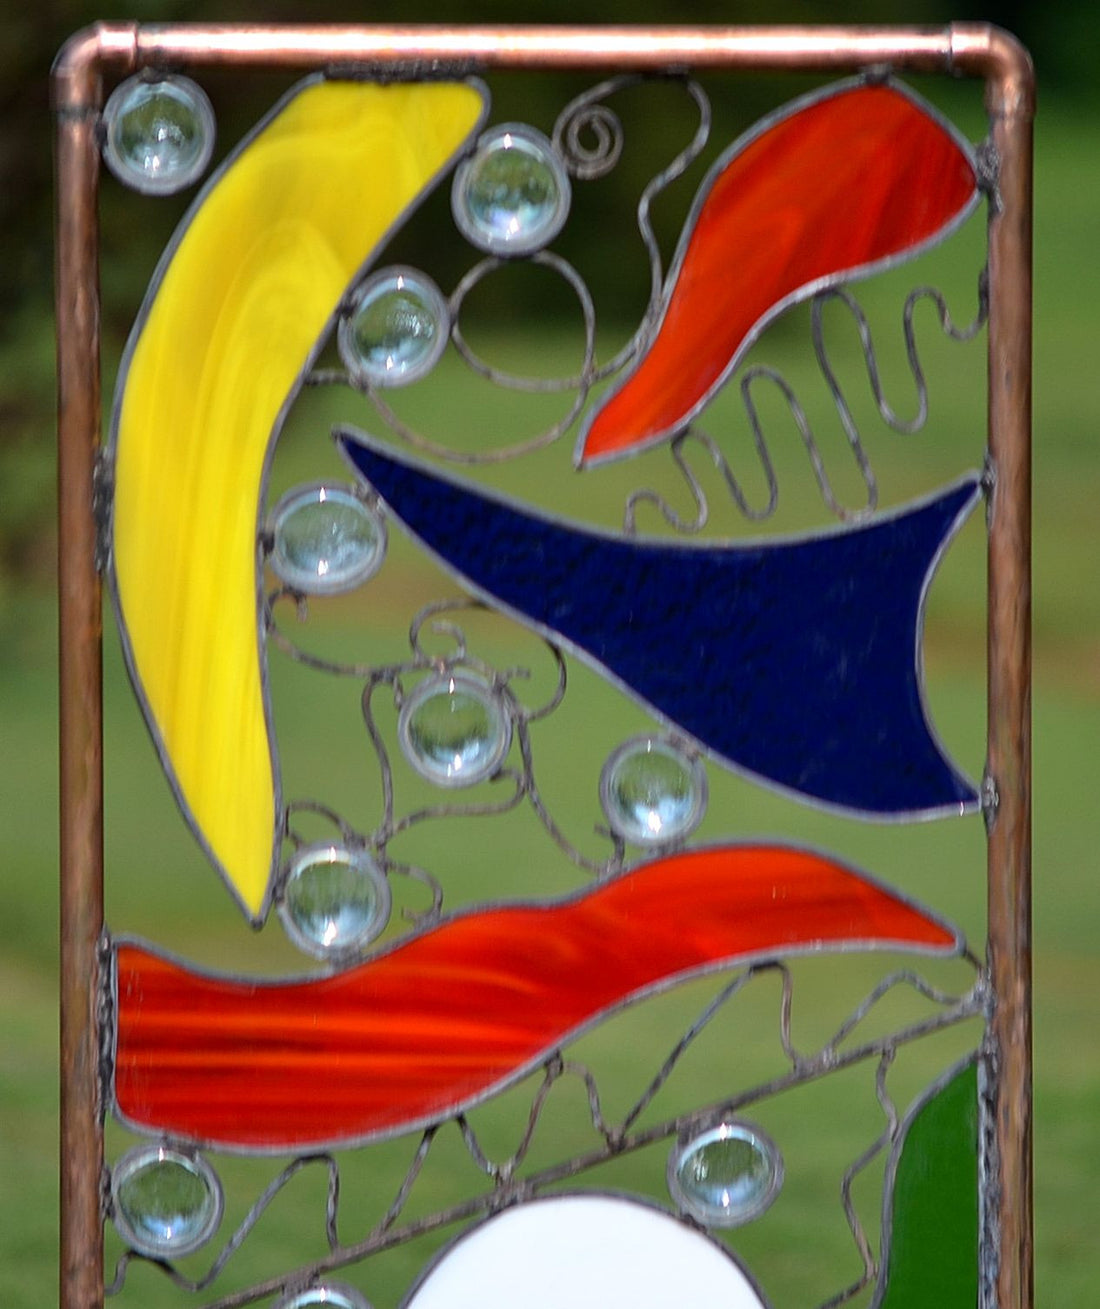 Contemporary Abstract Garden Art Copper and Stained Glass Yard Art. &quot;Fantasy&quot;